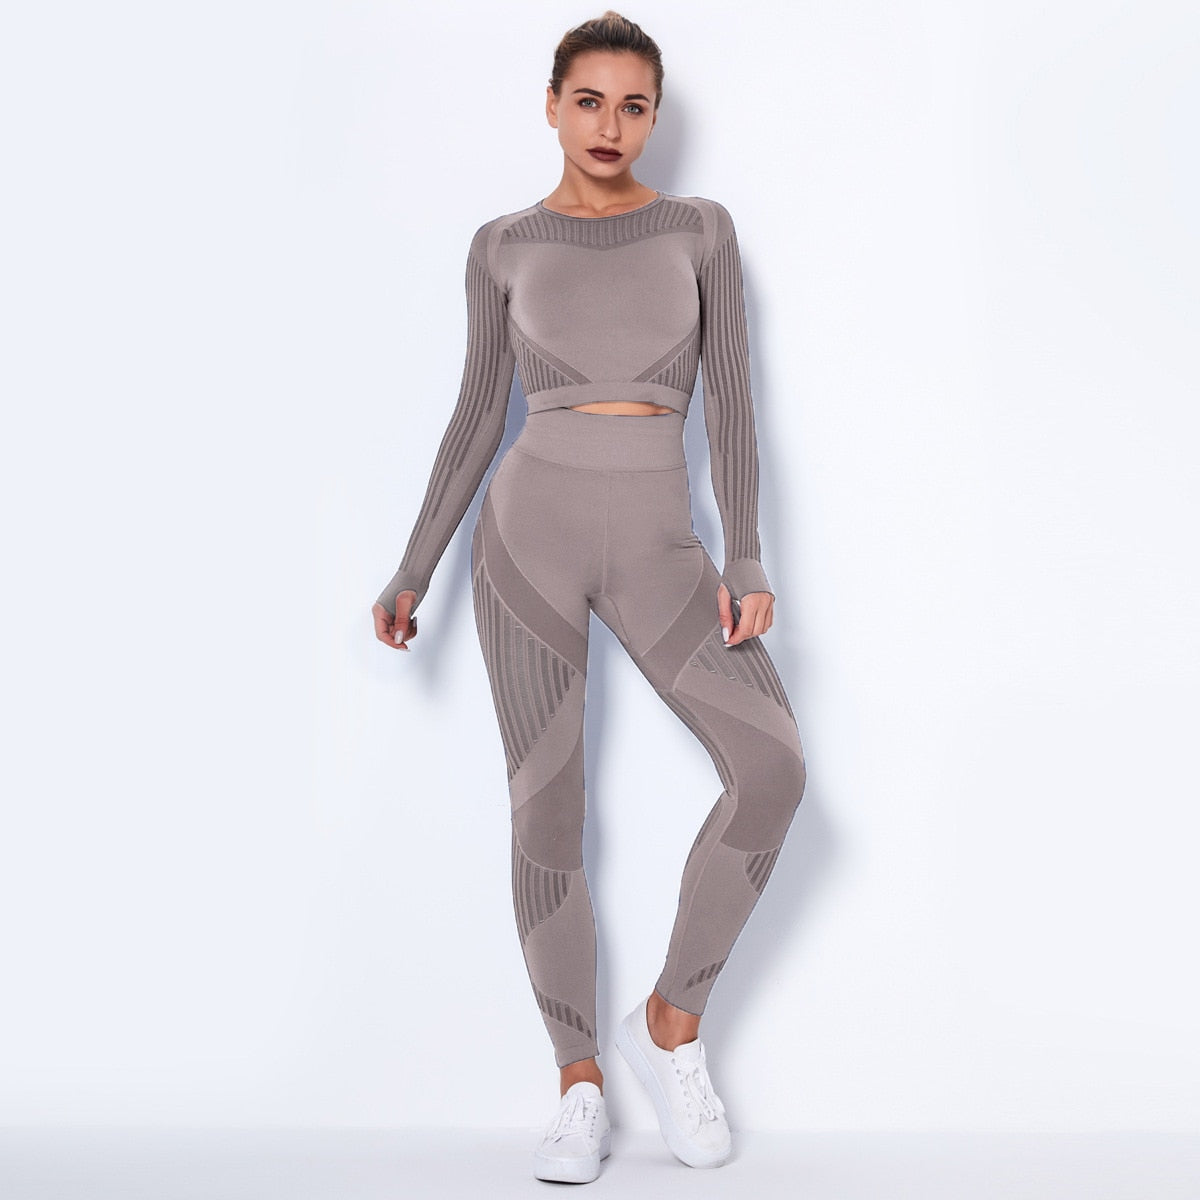 Workout Sets For Women 2 Piece Seamless Yoga Outfit Tracksuit High Waisted Yoga Leggings And Crop Top Gym Clothes Set brownL  109.99 EZYSELLA SHOP